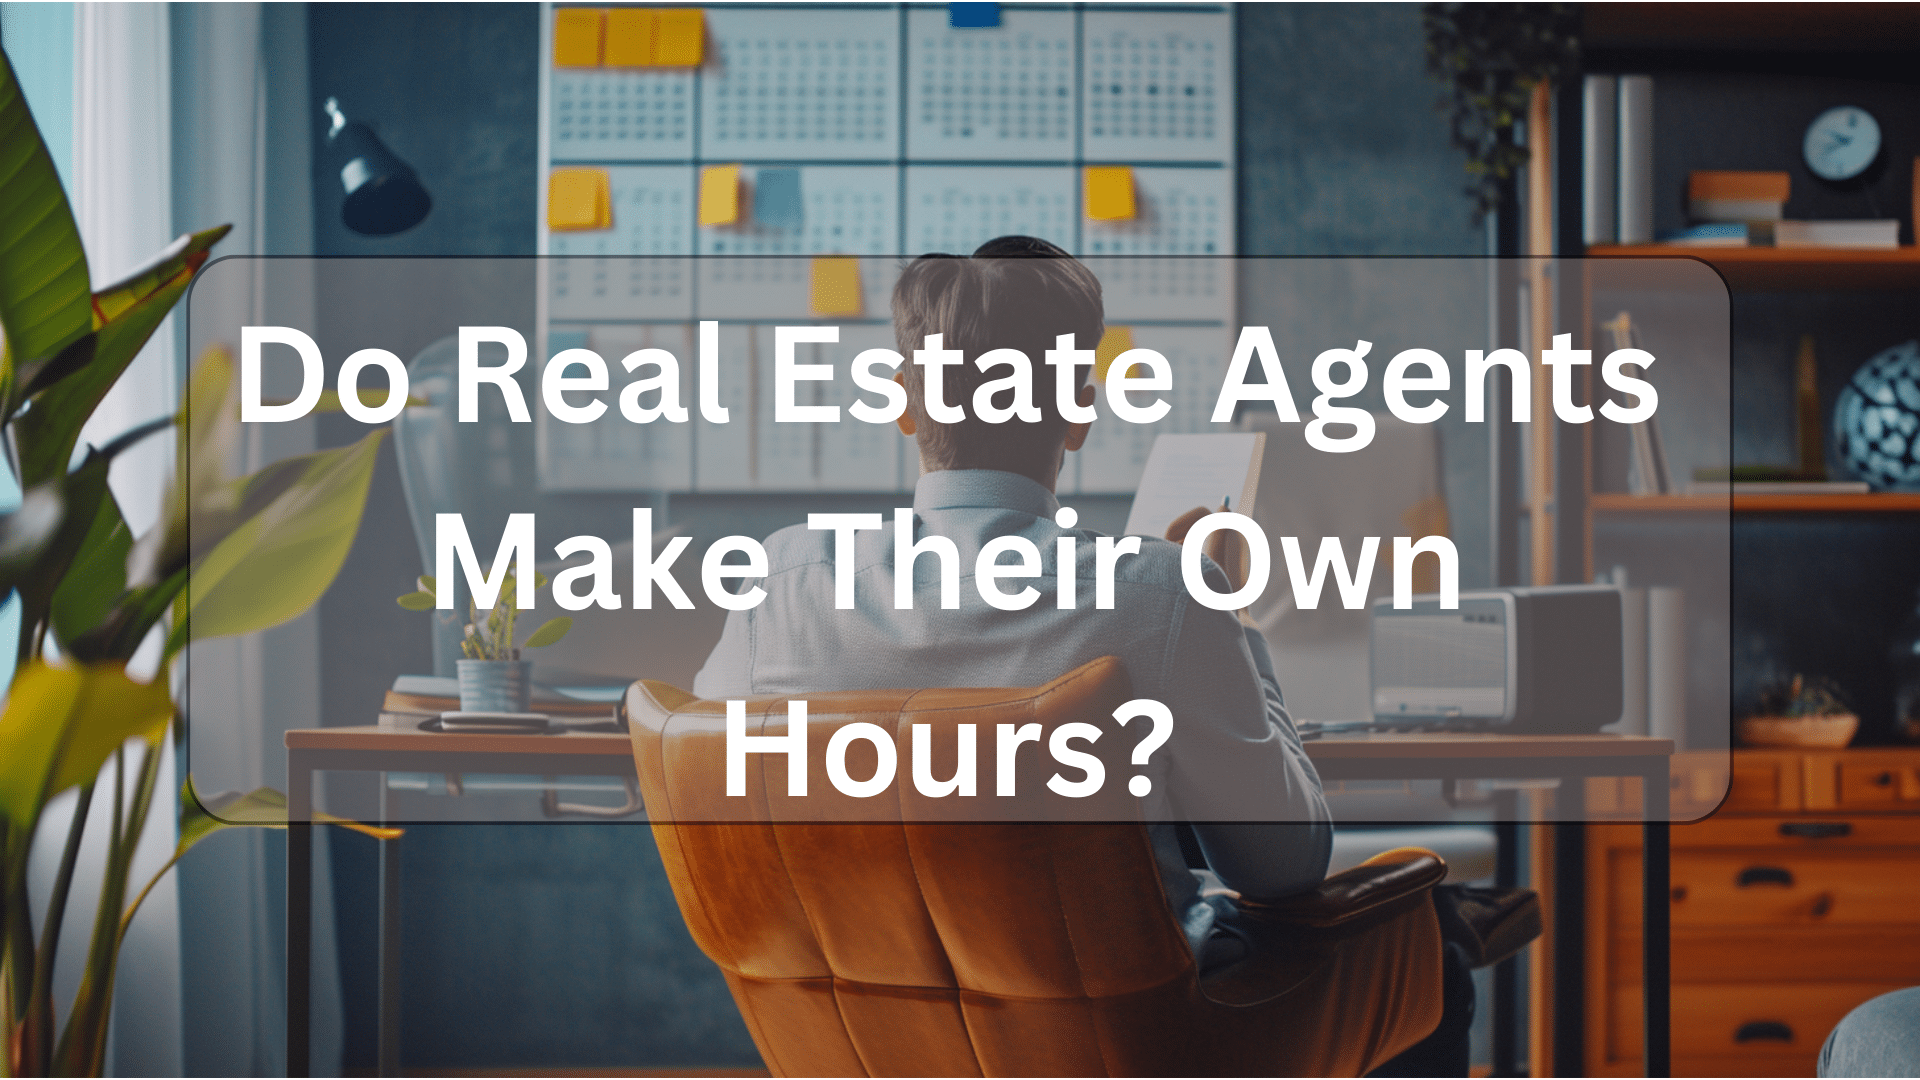 Do real estate agents make their own hours